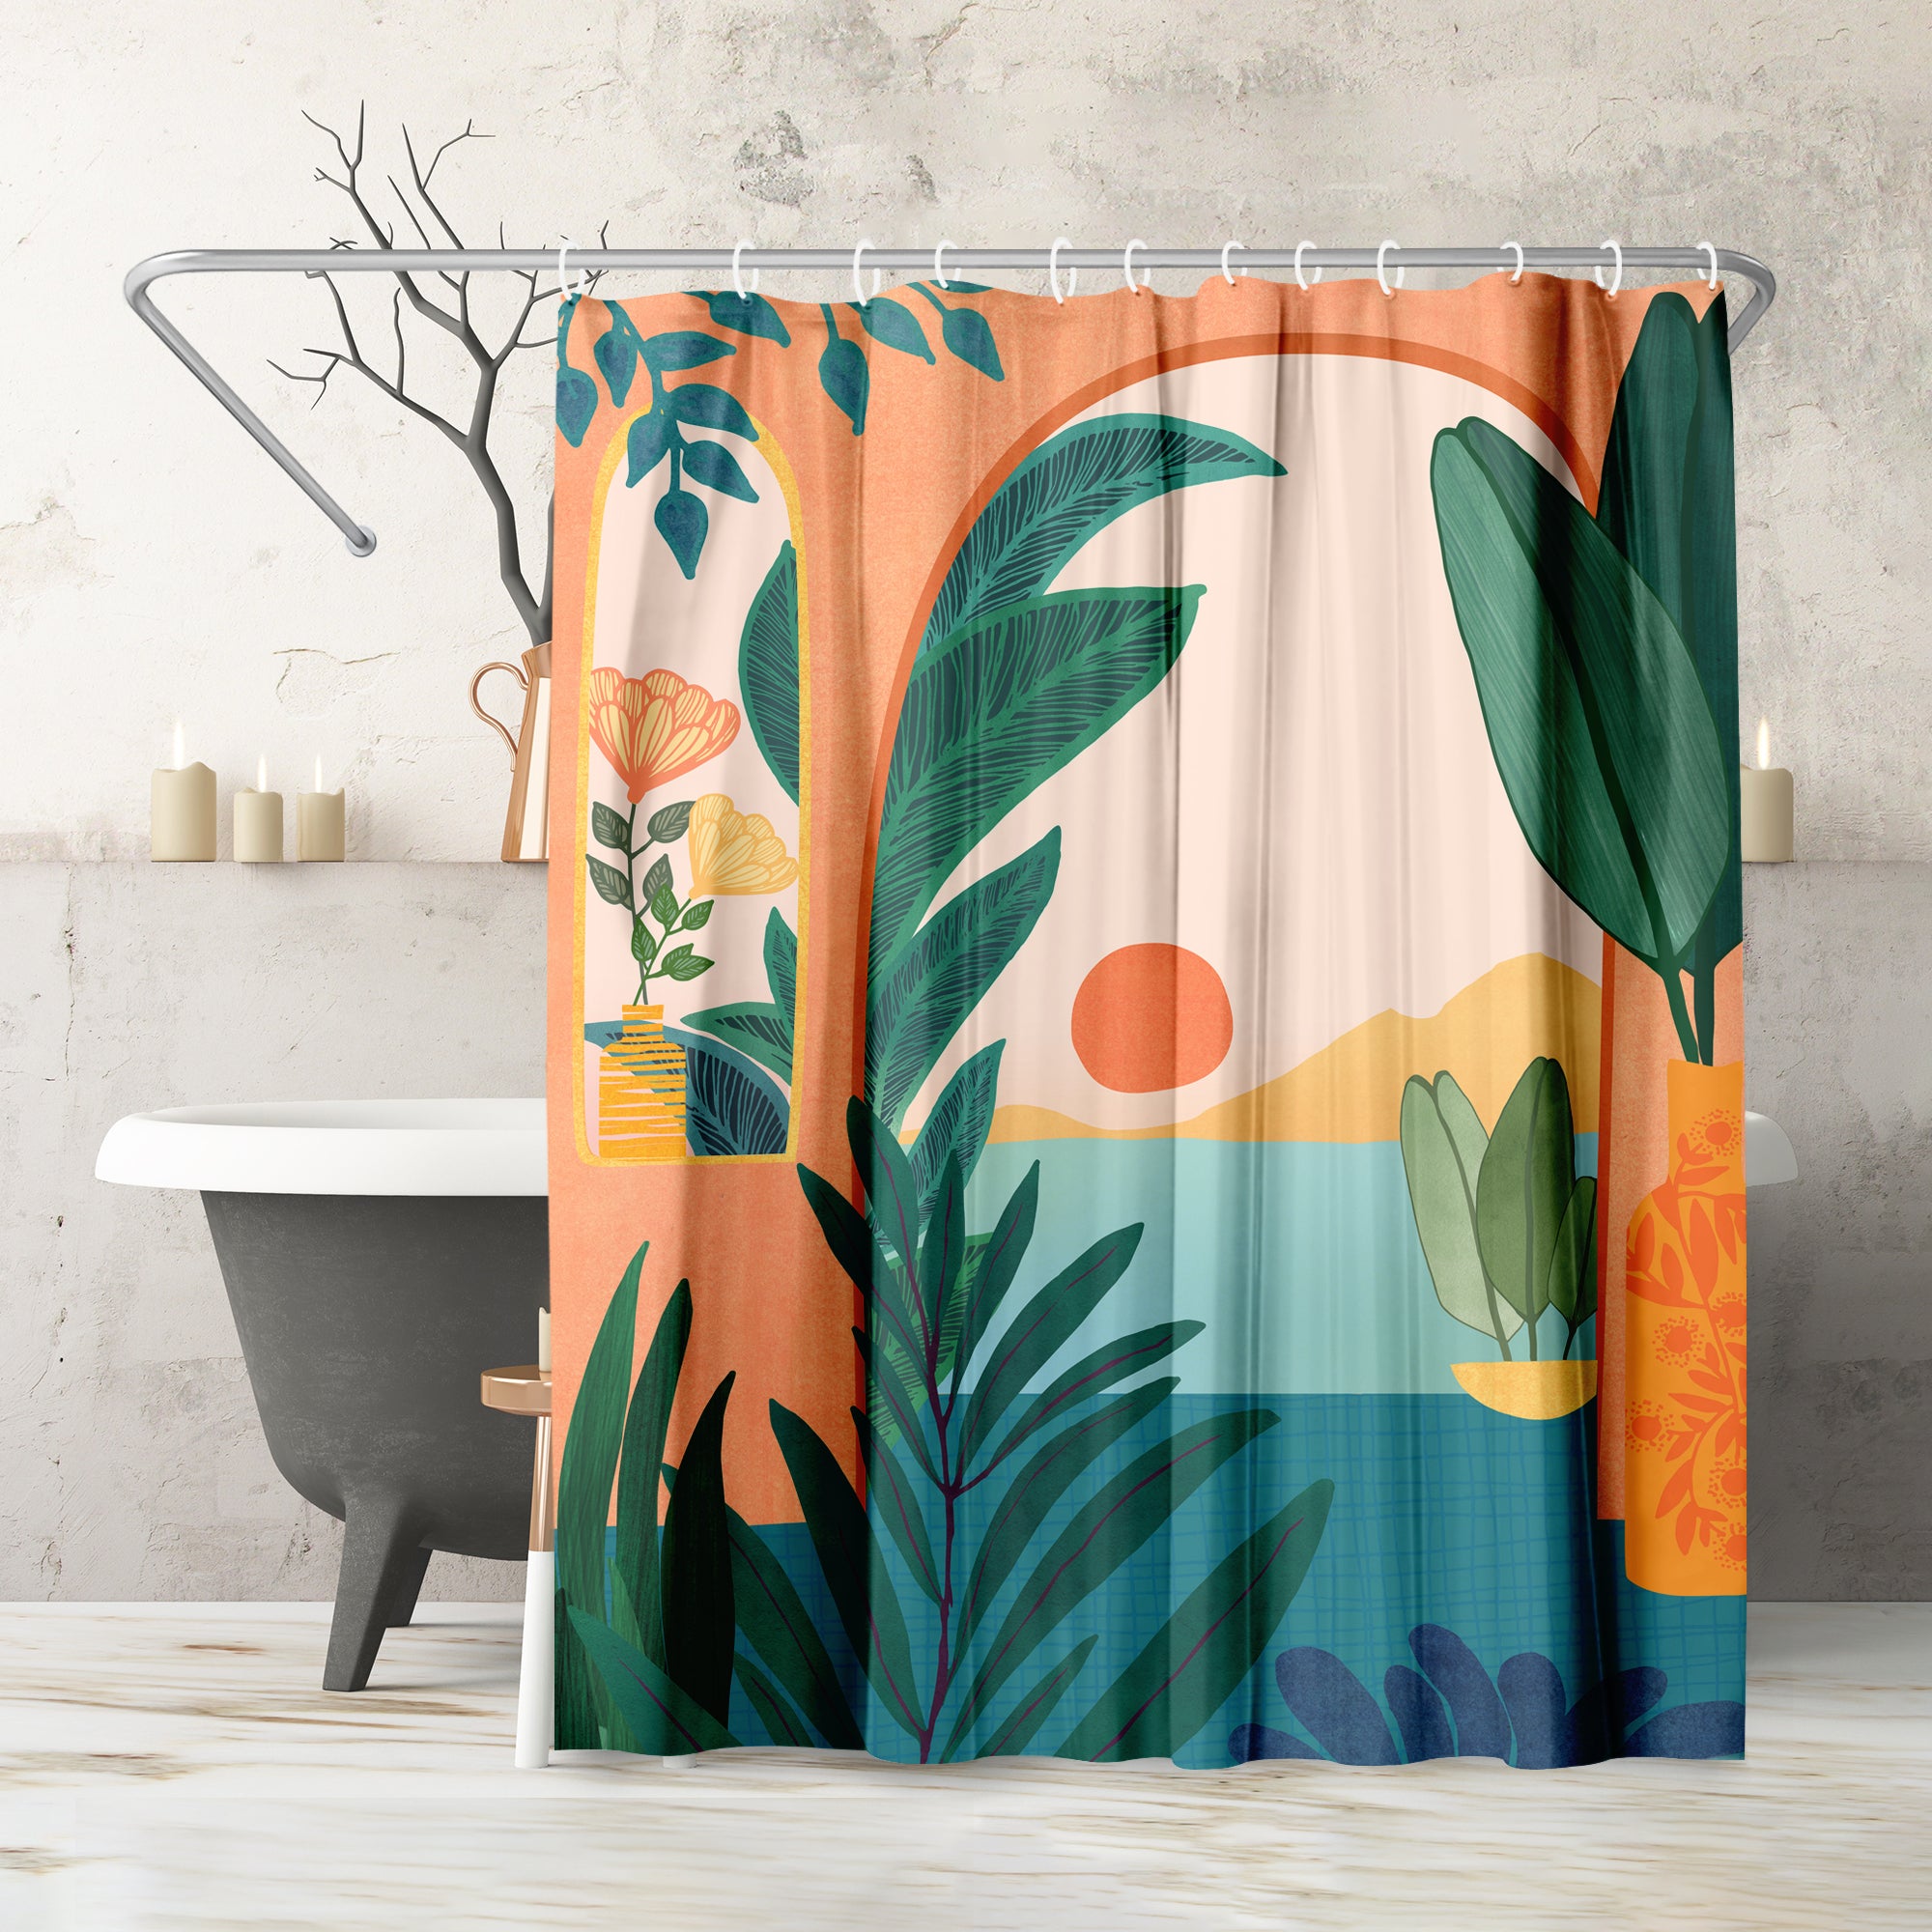 Americanflat 71 x 74 Shower Curtain, Ocean View by Modern Tropical